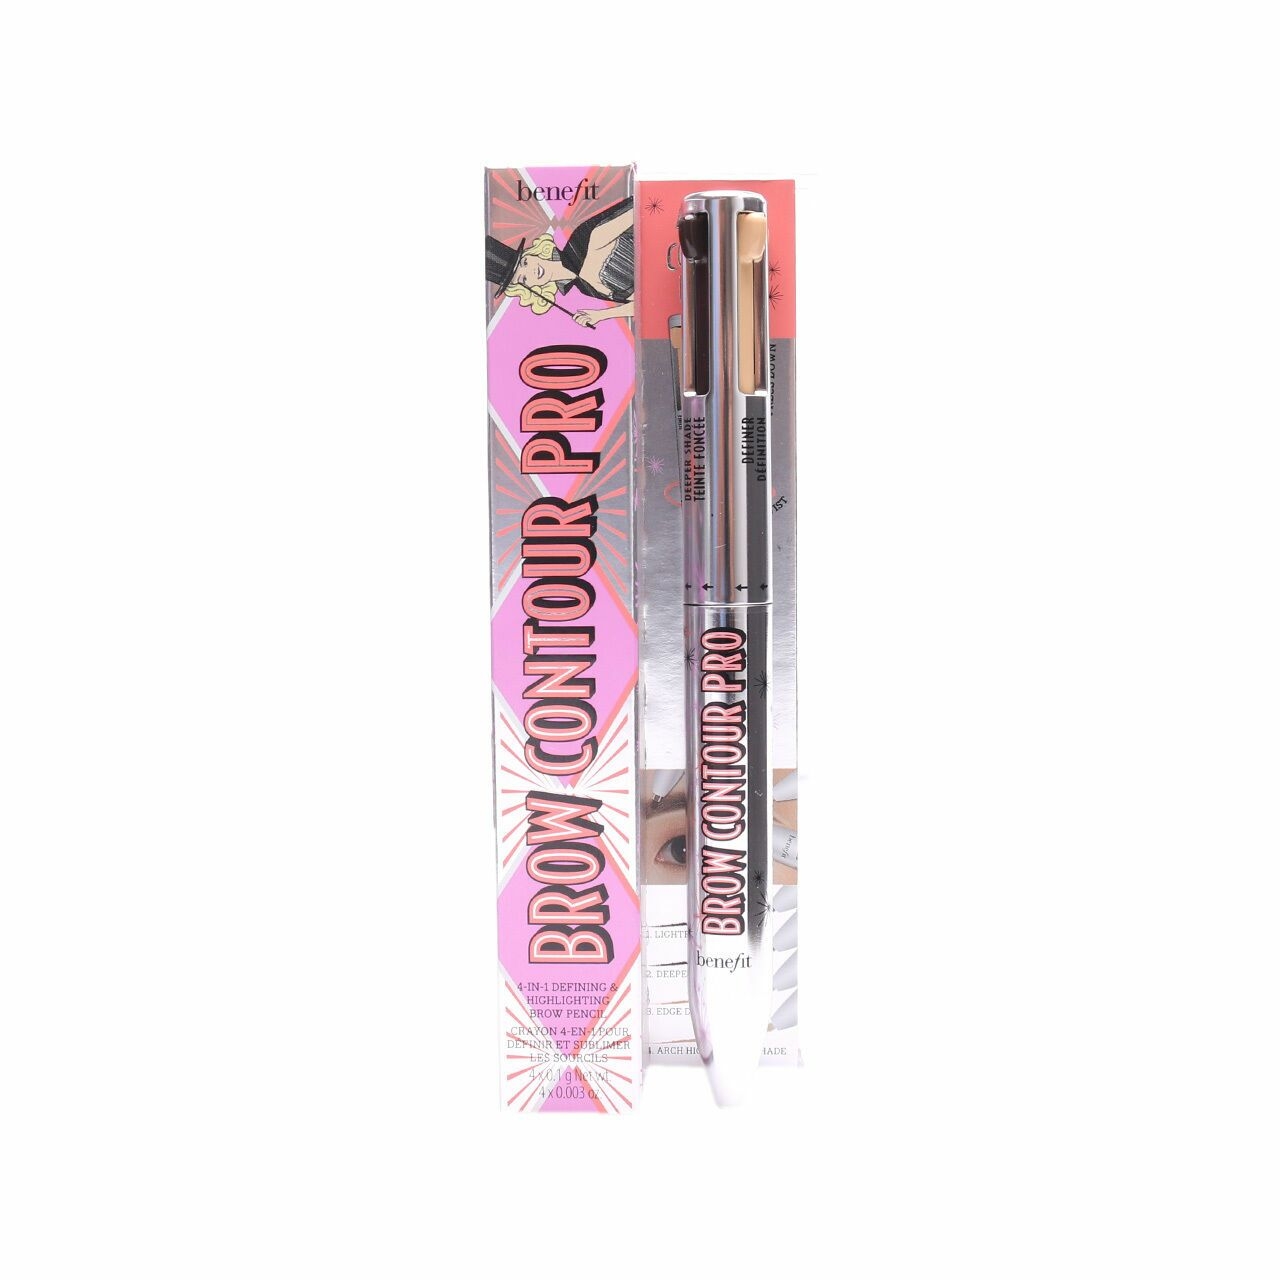 Benefit Brown, Black, & Light Brow Contour Pro 4-in-1 Defining & Highlighting Brow Pencil Eyes